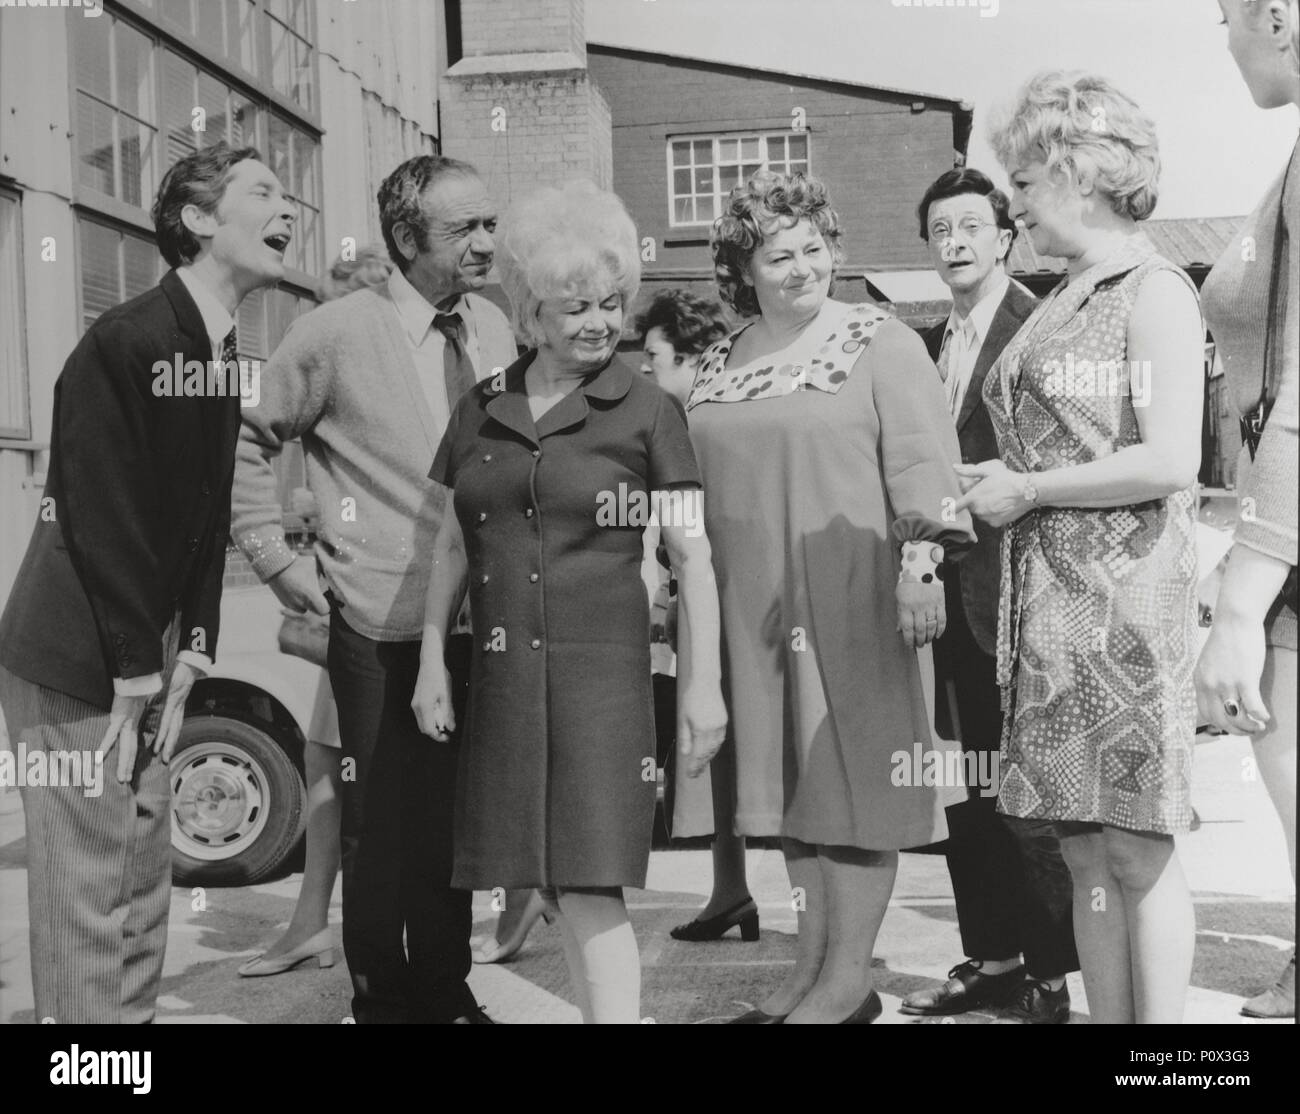 Original Film Title: CARRY ON AT YOUR CONVENIENCE.  English Title: CARRY ON AT YOUR CONVENIENCE.  Film Director: GERALD THOMAS.  Year: 1971.  Stars: CHARLES HAWTREY; KENNETH WILLIAMS; JOAN SIMS; SID JAMES; HATTIE JACQUES. Credit: RANK / Album Stock Photo